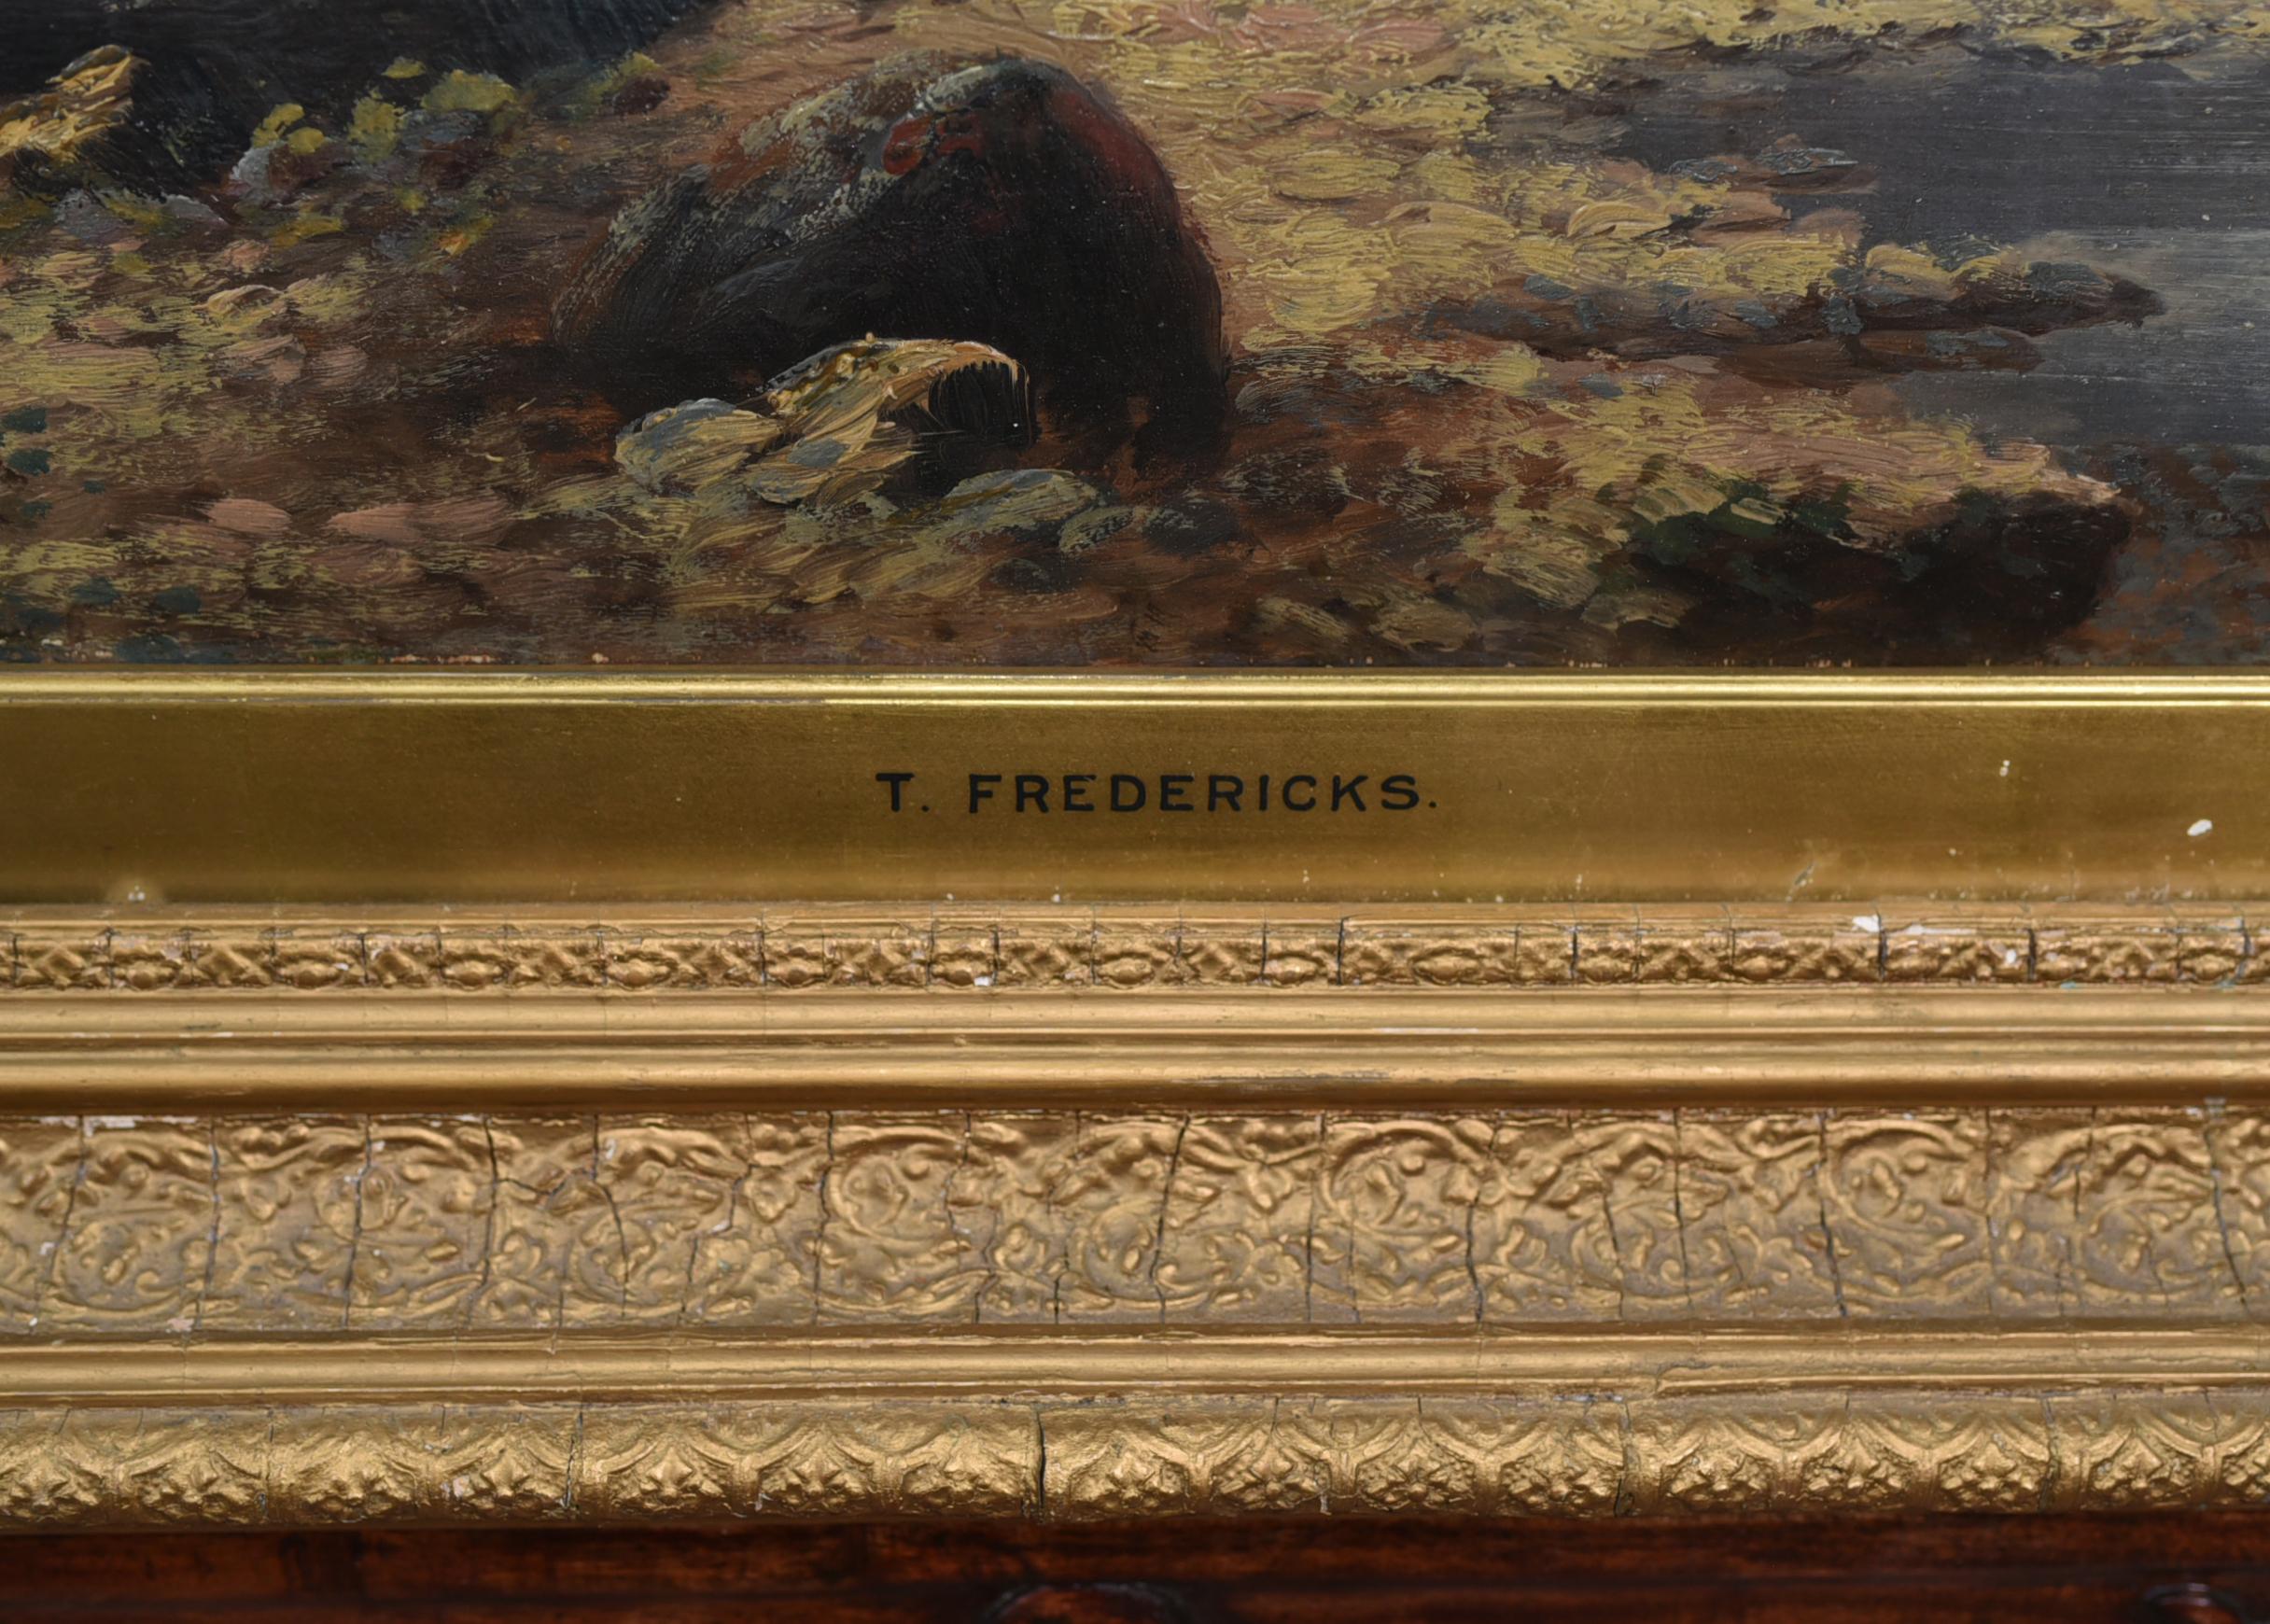 Wonderful oil painting of a moody mountainous landscape by T Fredericks
Ernest T. Fredericks (1877 - 1959) was active/lived in Arkansas, Illinois
Piece comes in the intricate gilt frame and is enscribed T Fredericks
AT first we thought the